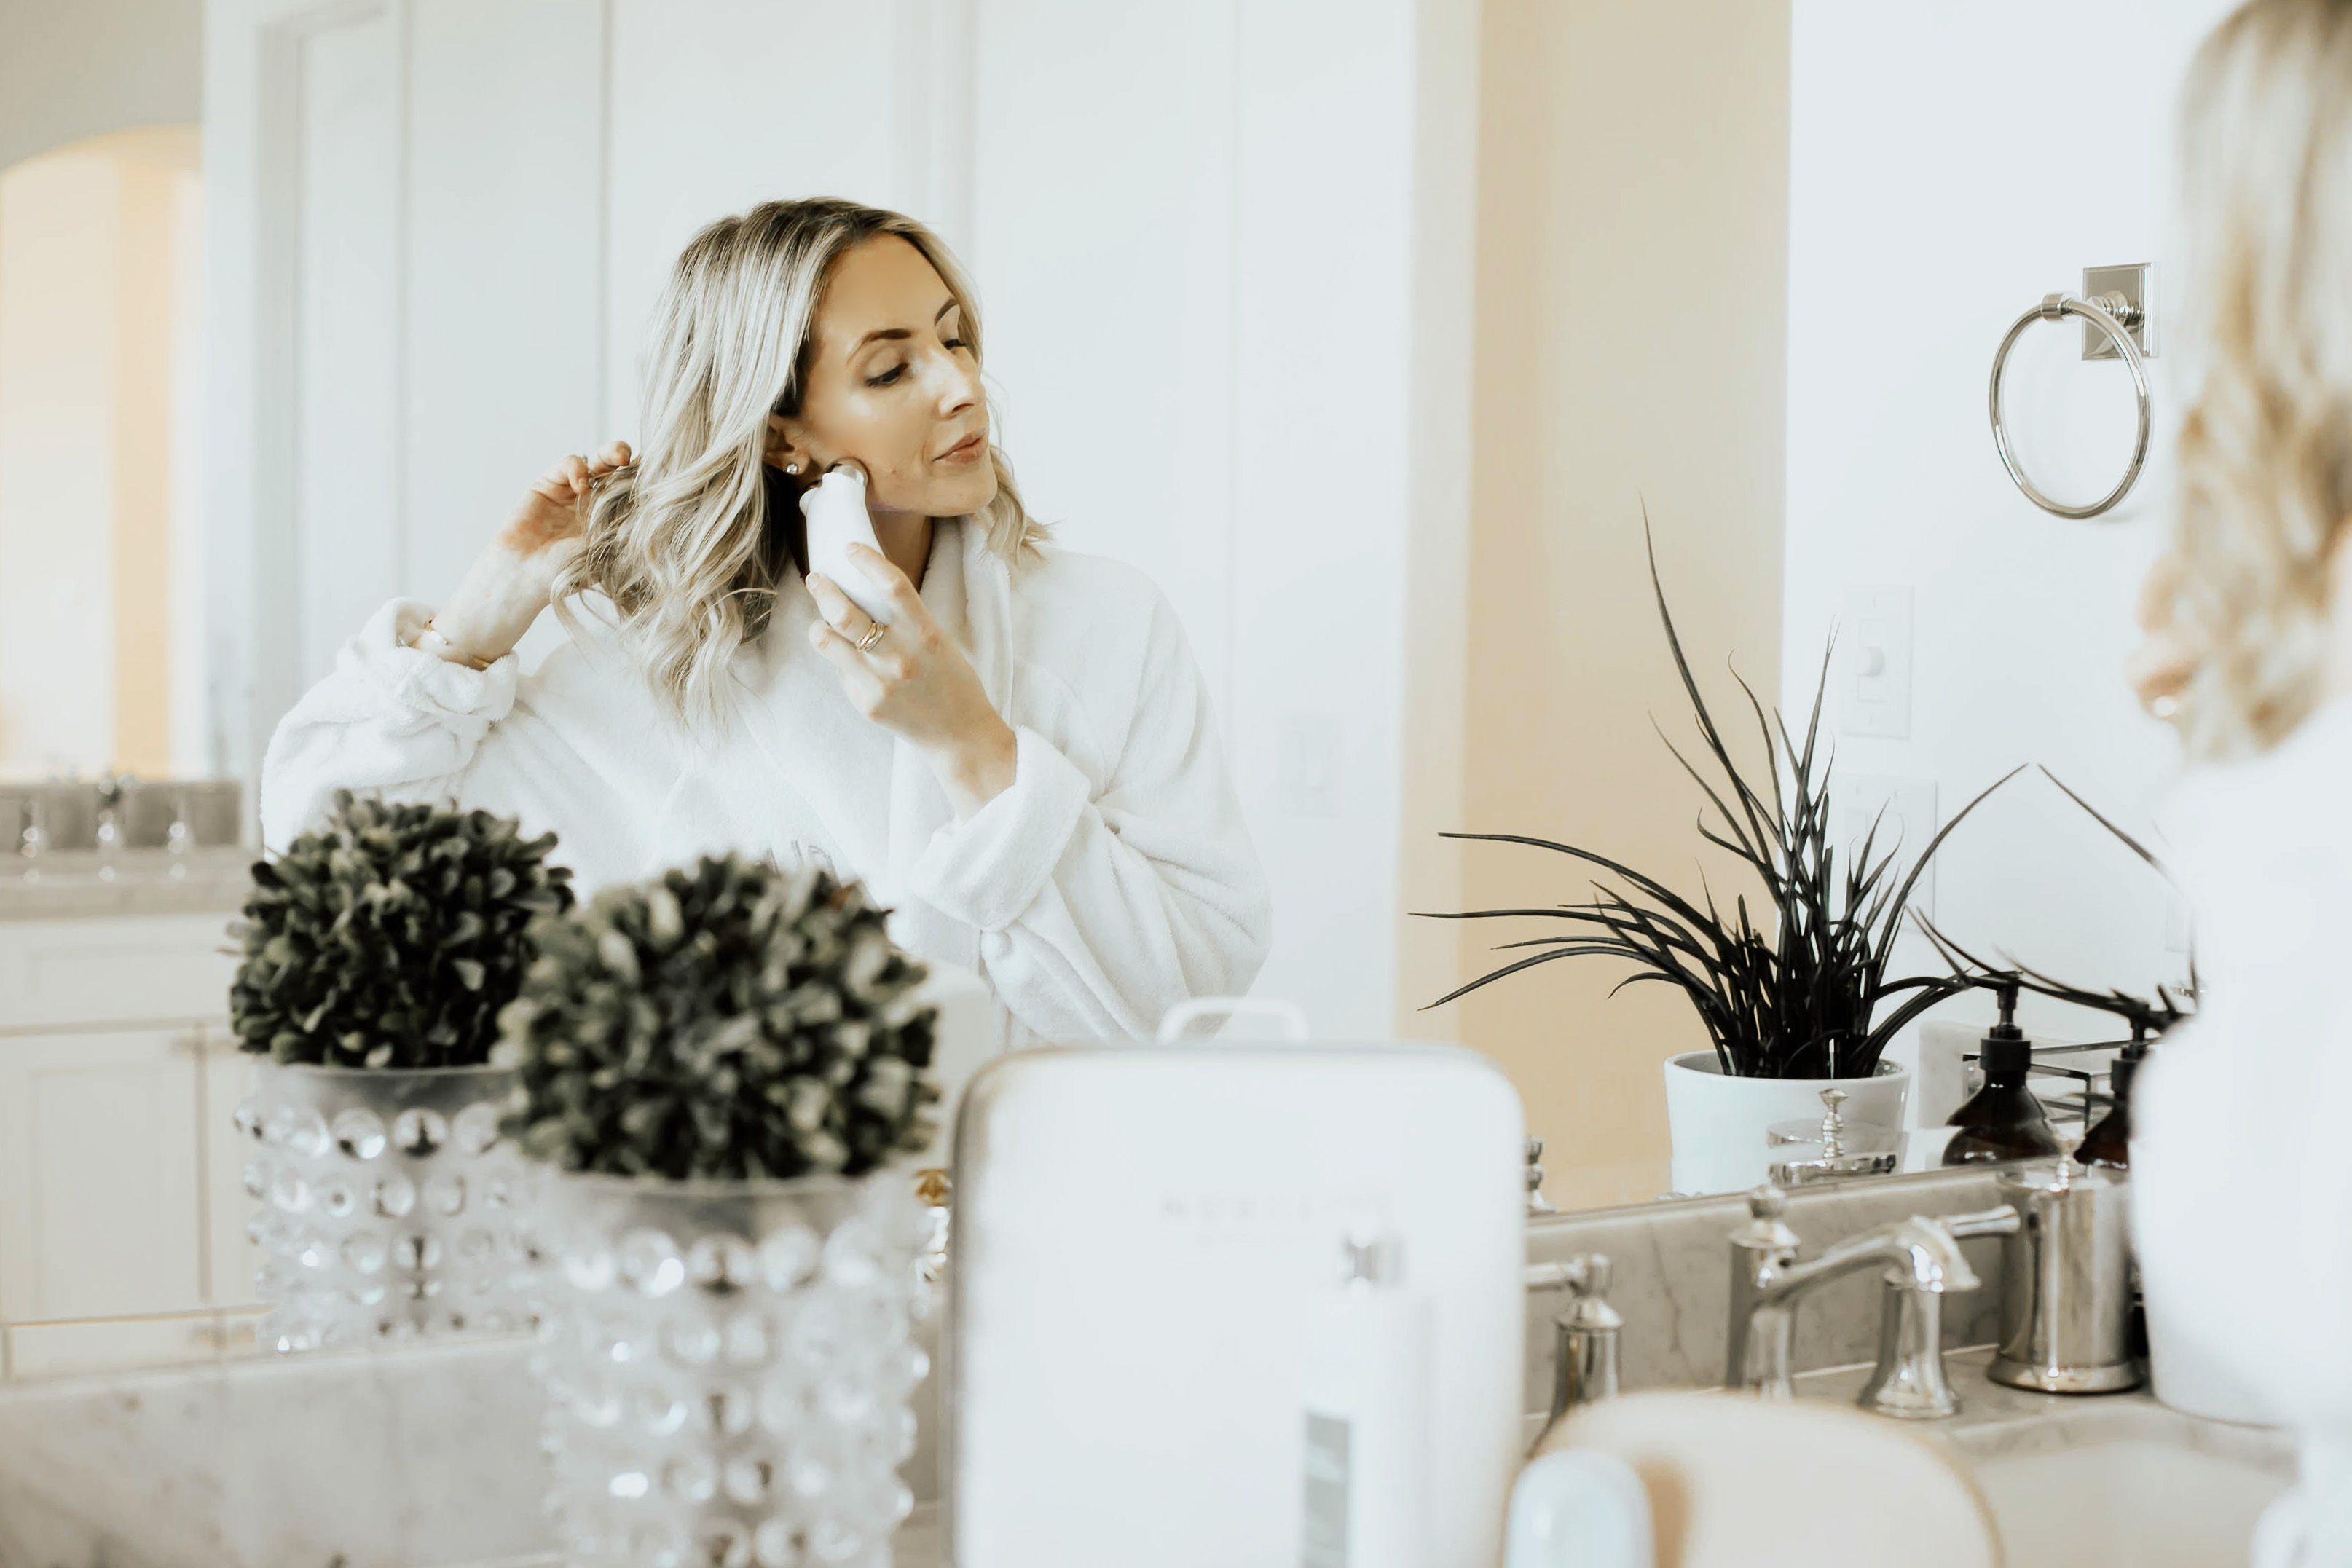 Bloggers Ashley Zeal and Emily Wieczorek from Two Peas in a Prada review the Nubody Skin Toning Device you can use at home. Including an interview with the founder with her tips and tricks.